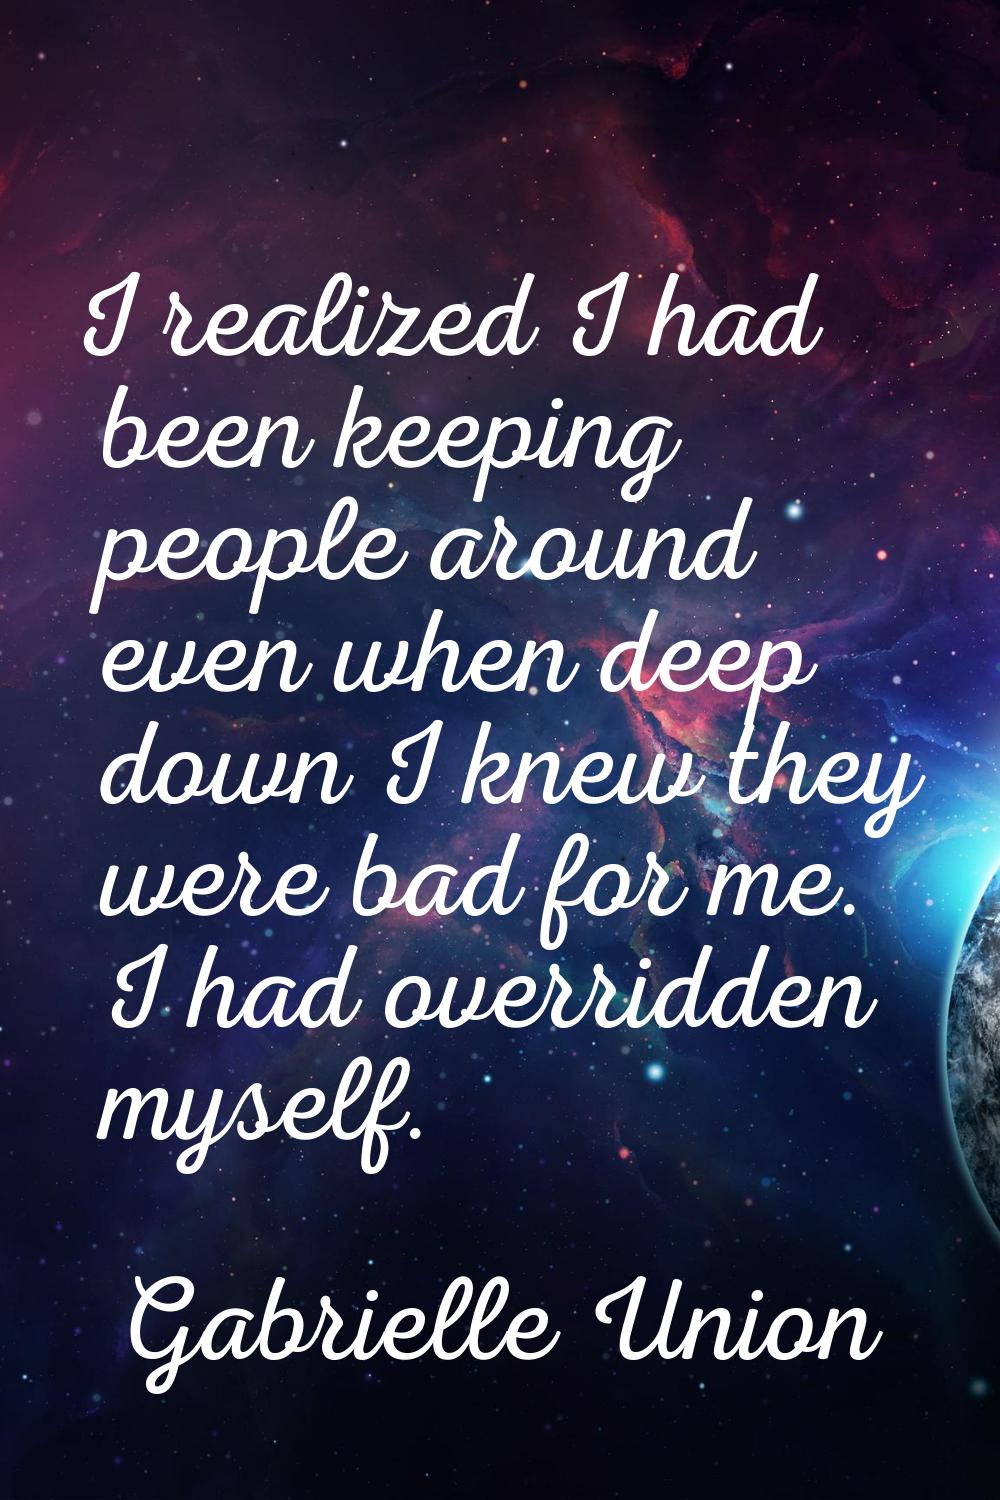 I realized I had been keeping people around even when deep down I knew they were bad for me. I had 